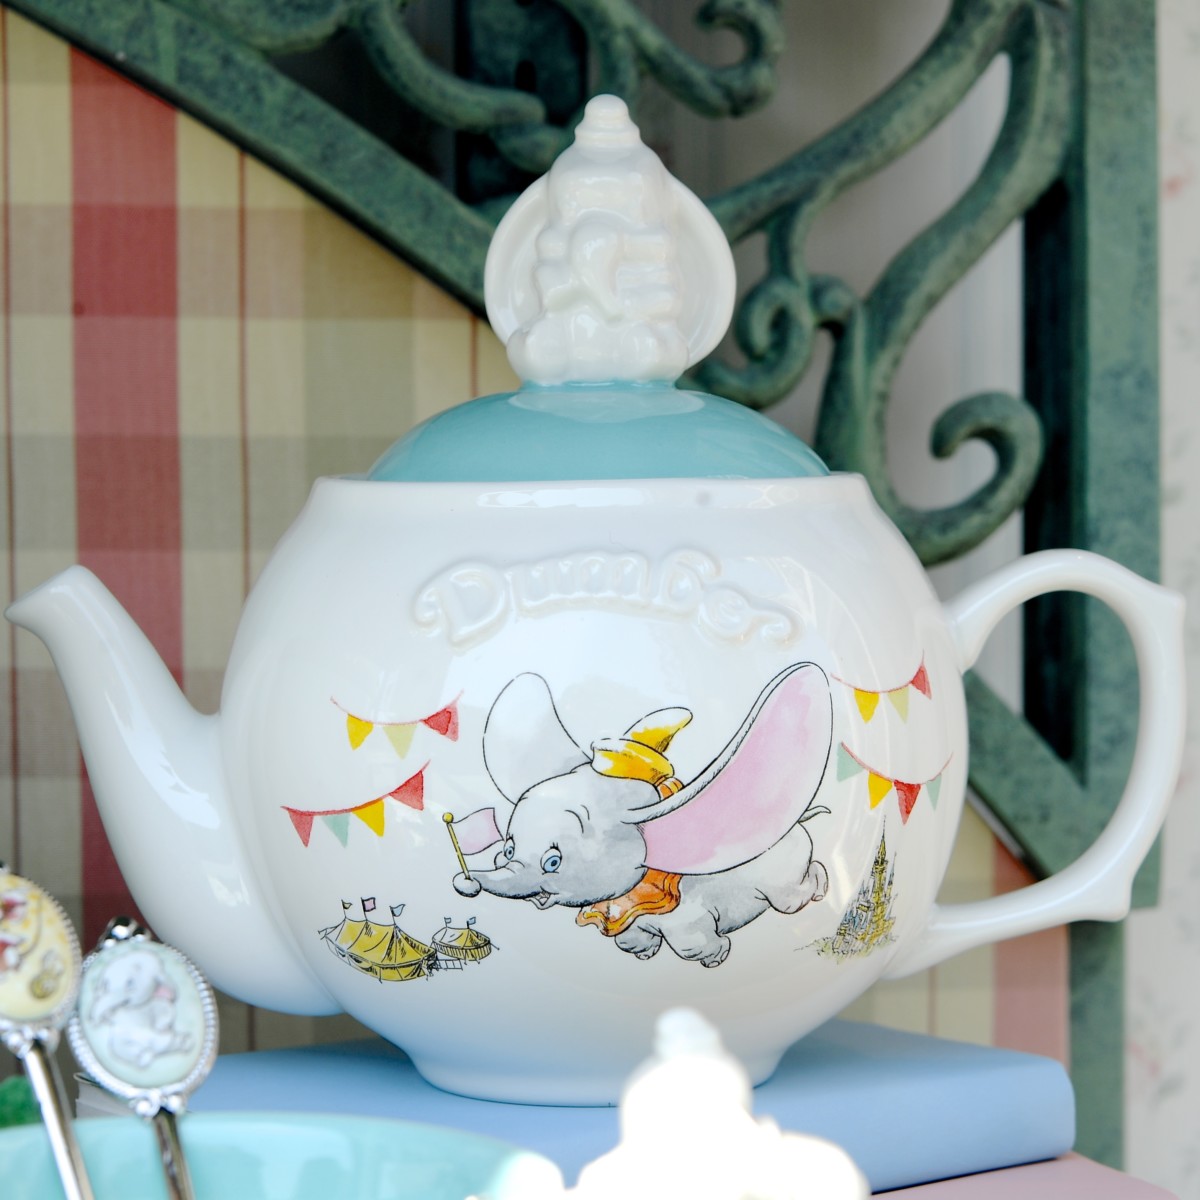 AfternoonTeaプロデュース！東京ディズニーリゾート『ダンボ』グッズ